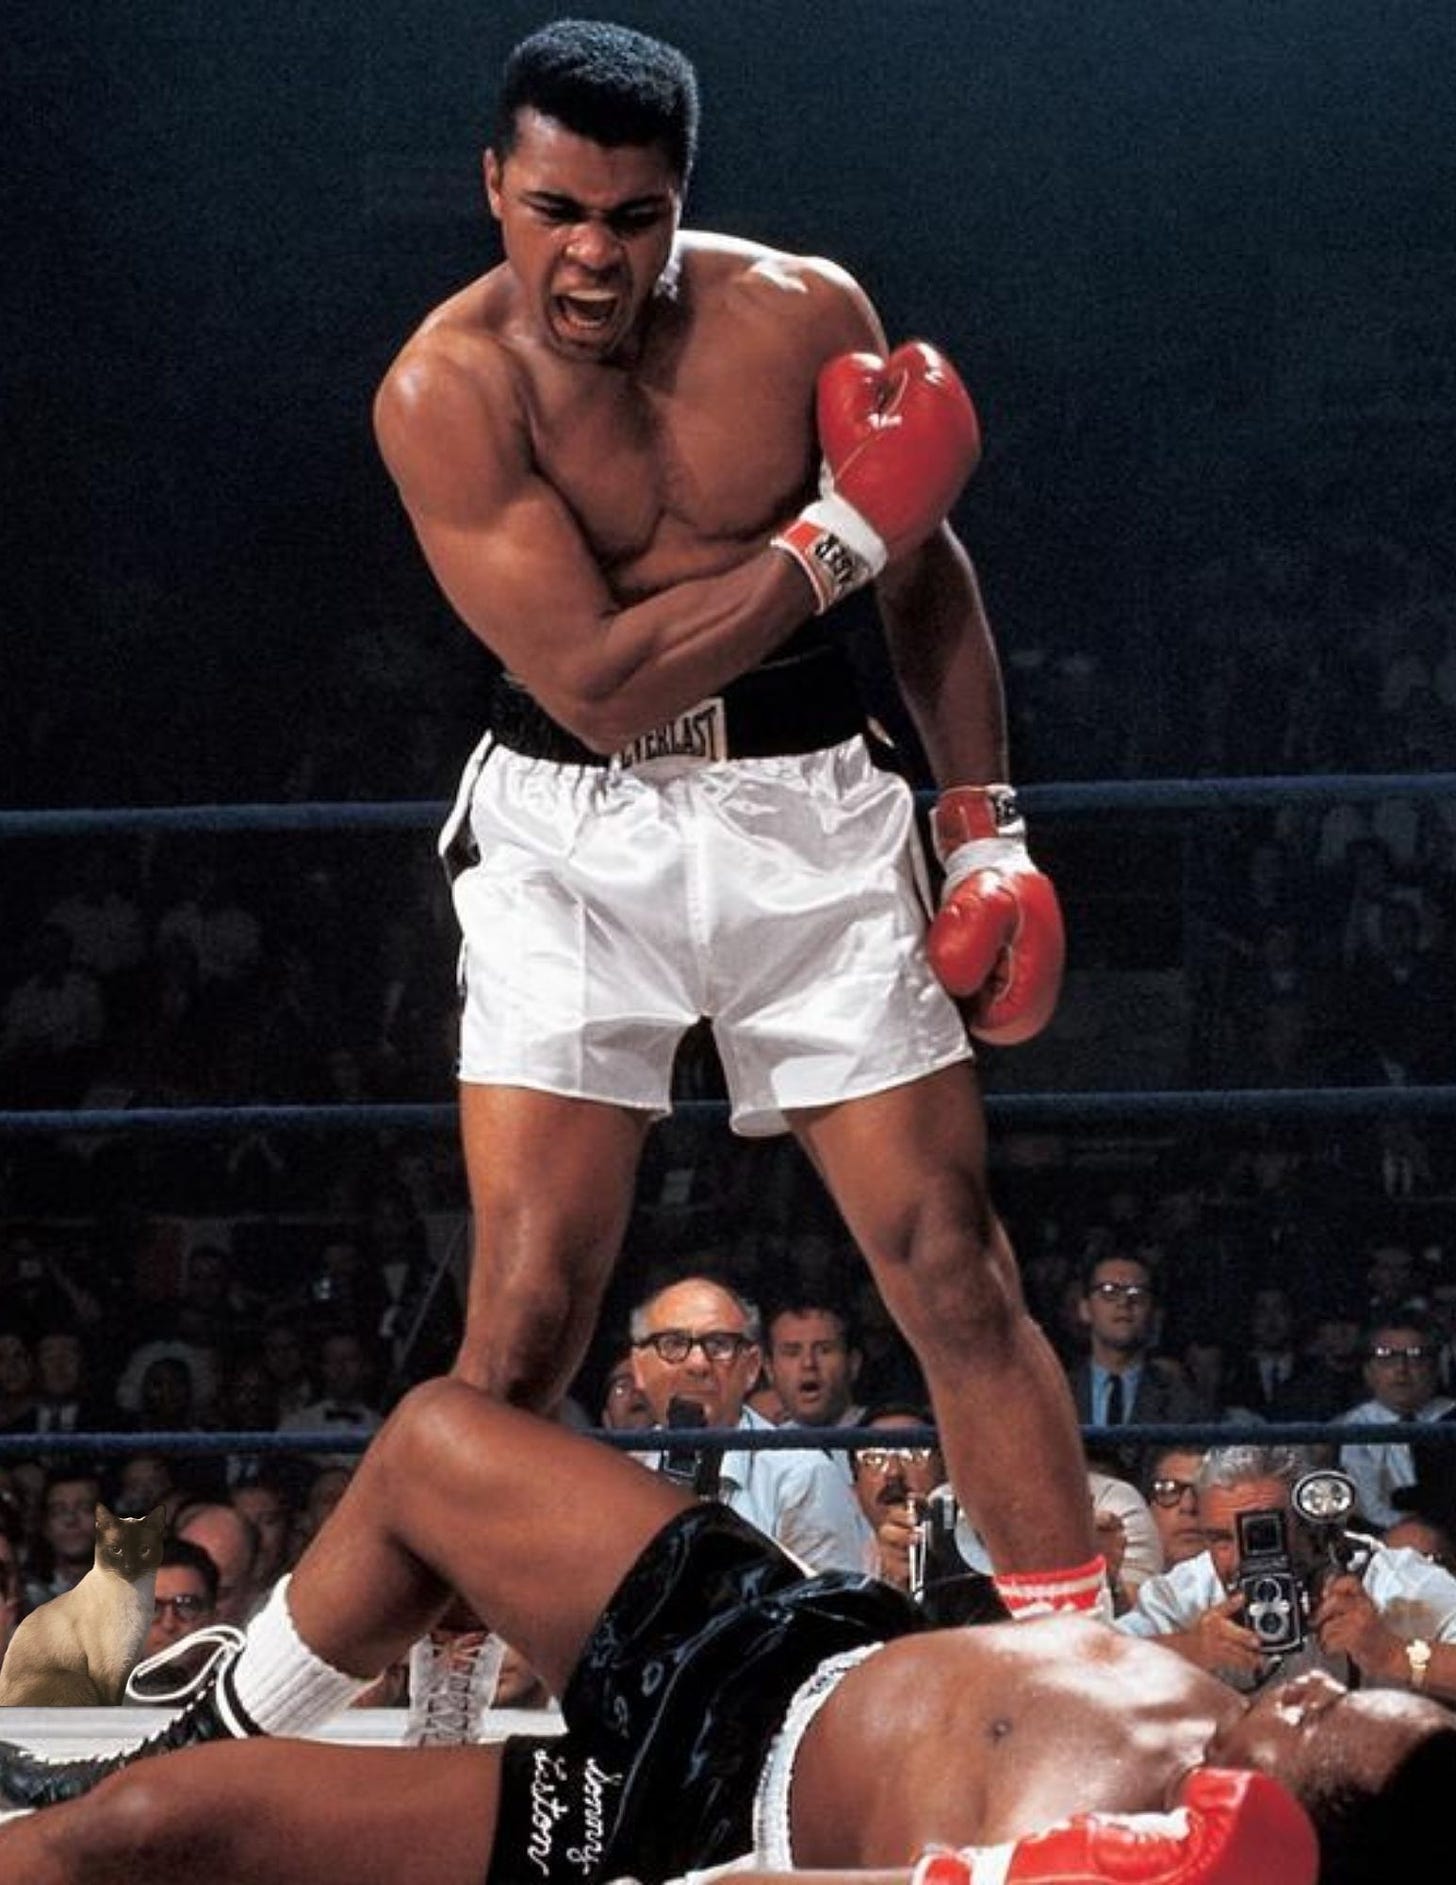 Photo of Muhammad Ali knocking out Joe Frazier, with Bonokio the cat in the front row of the audience